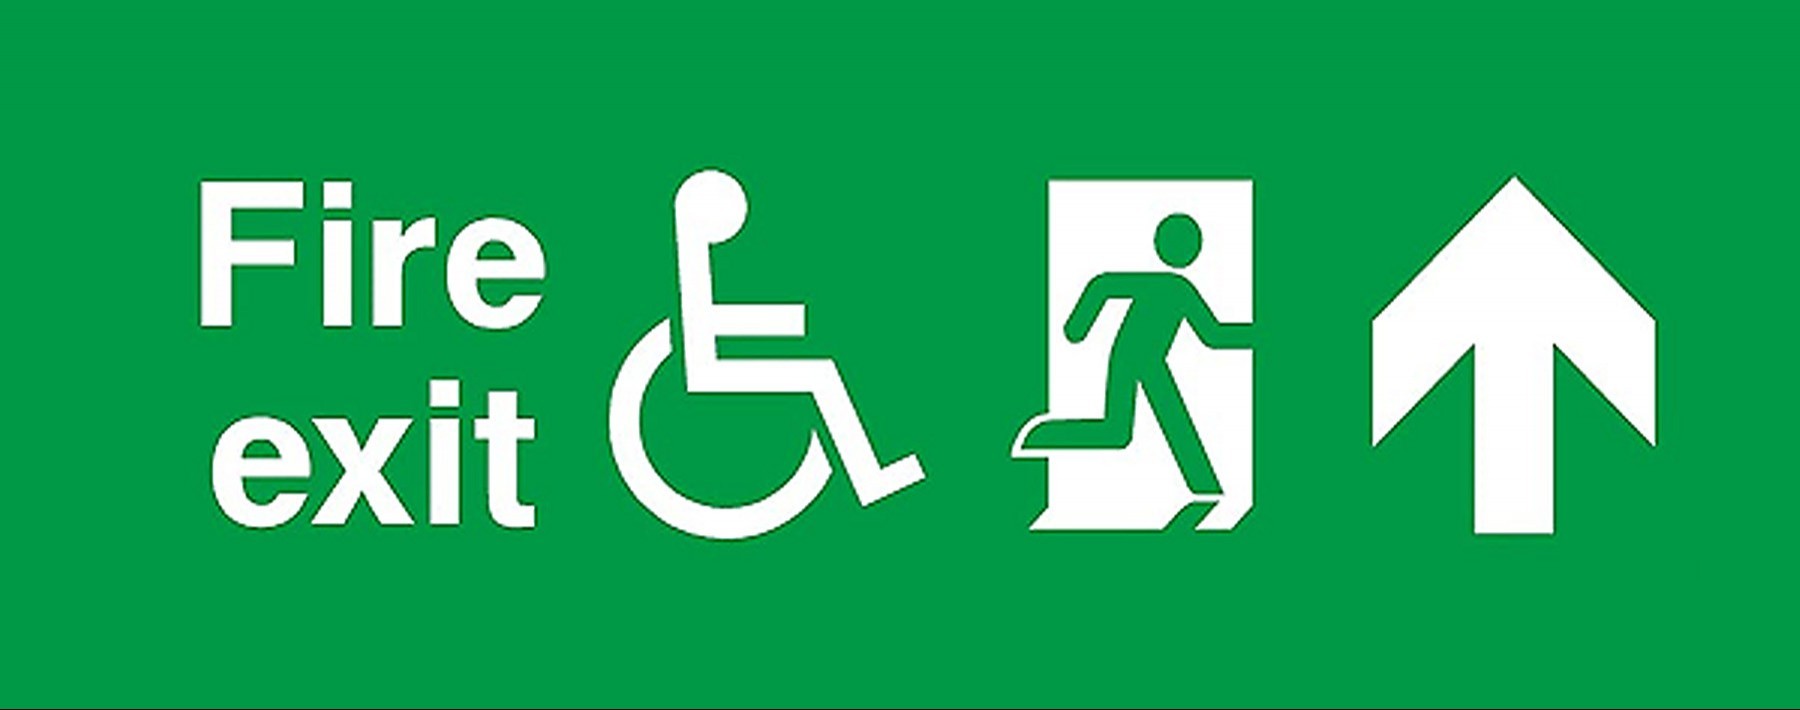 fire escape guide for disabled people 